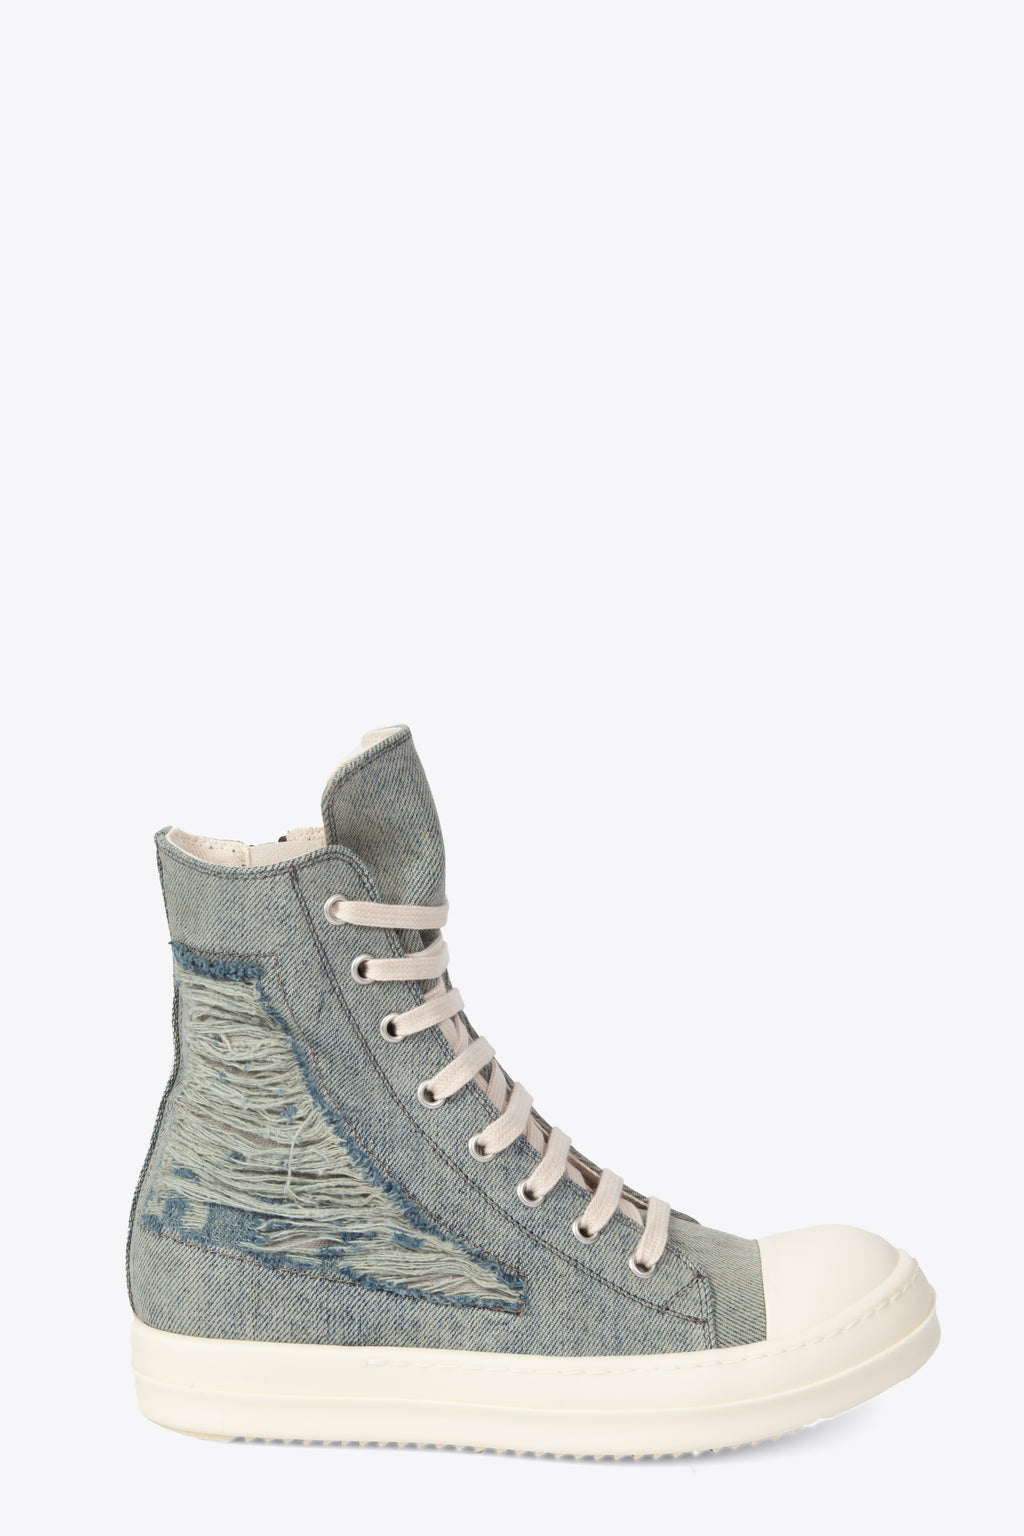 alt-image__Mineral-ripped-denim-lace-up-high-sneaker---Hi-sneaks